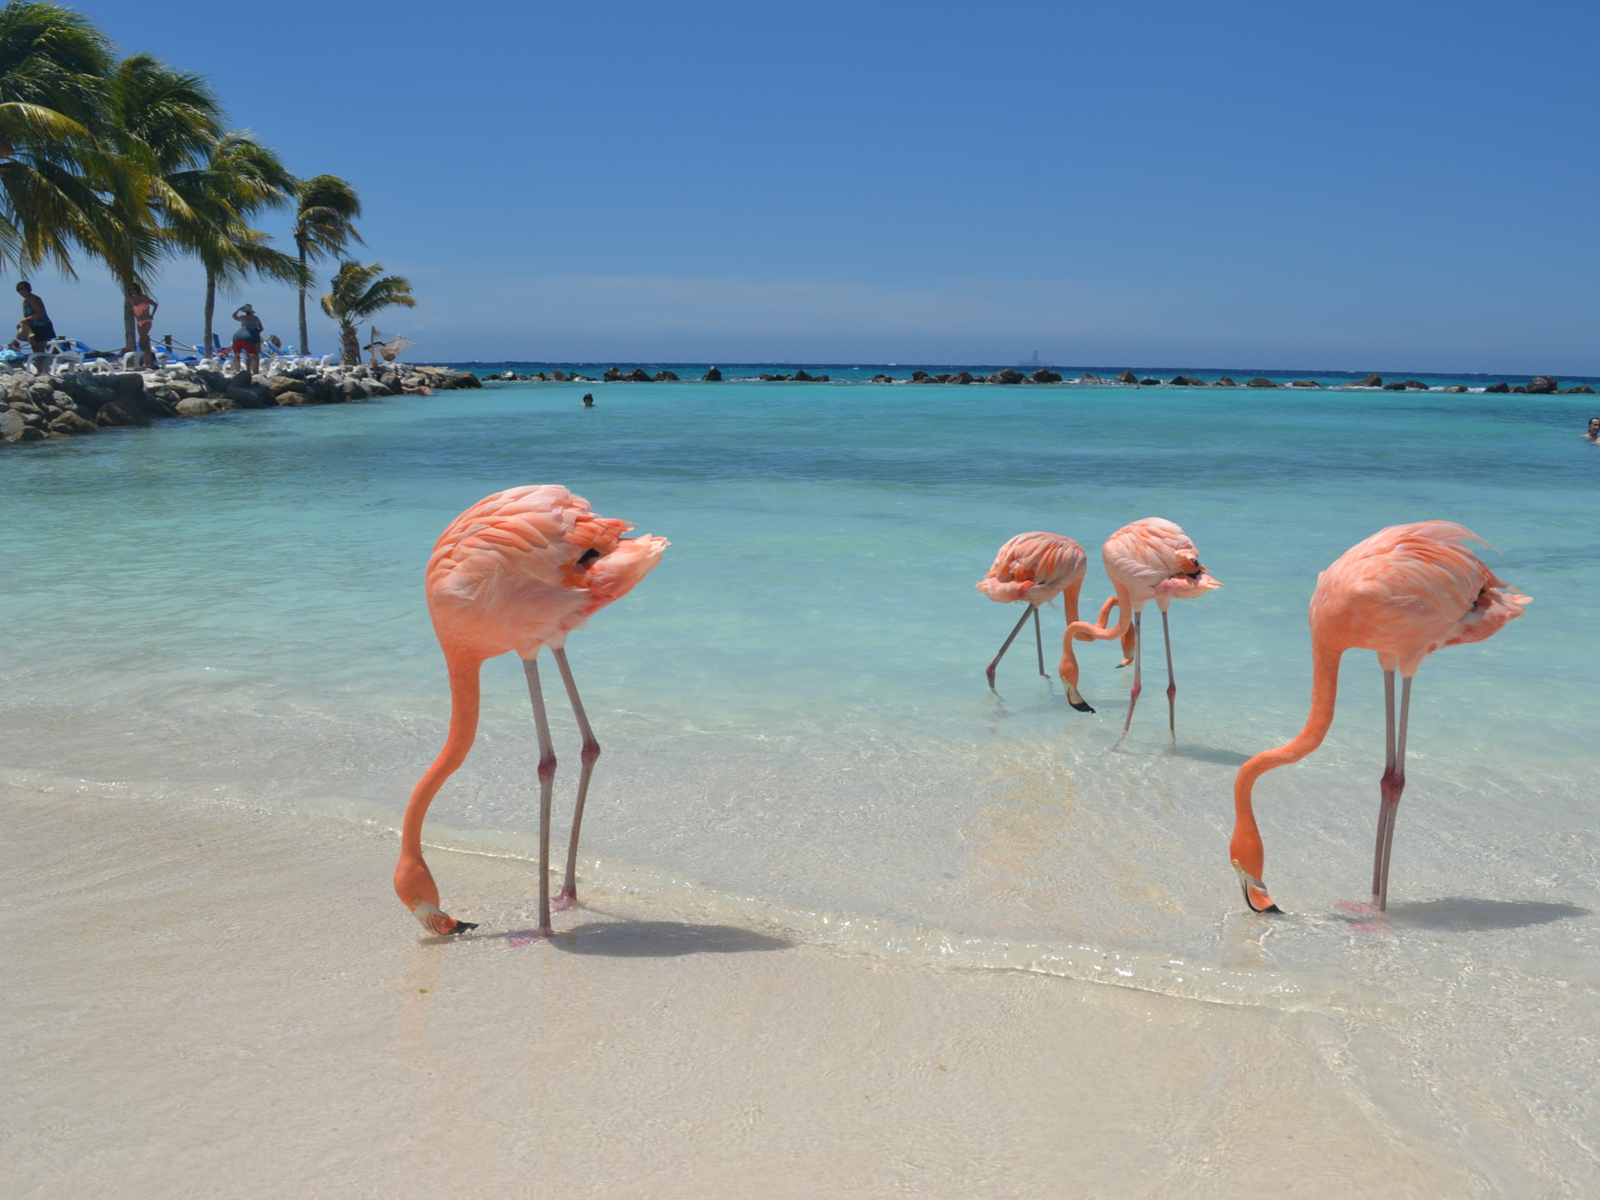 Renaissance Island Flamingos in the water, one of our picks for things to do in Aruba